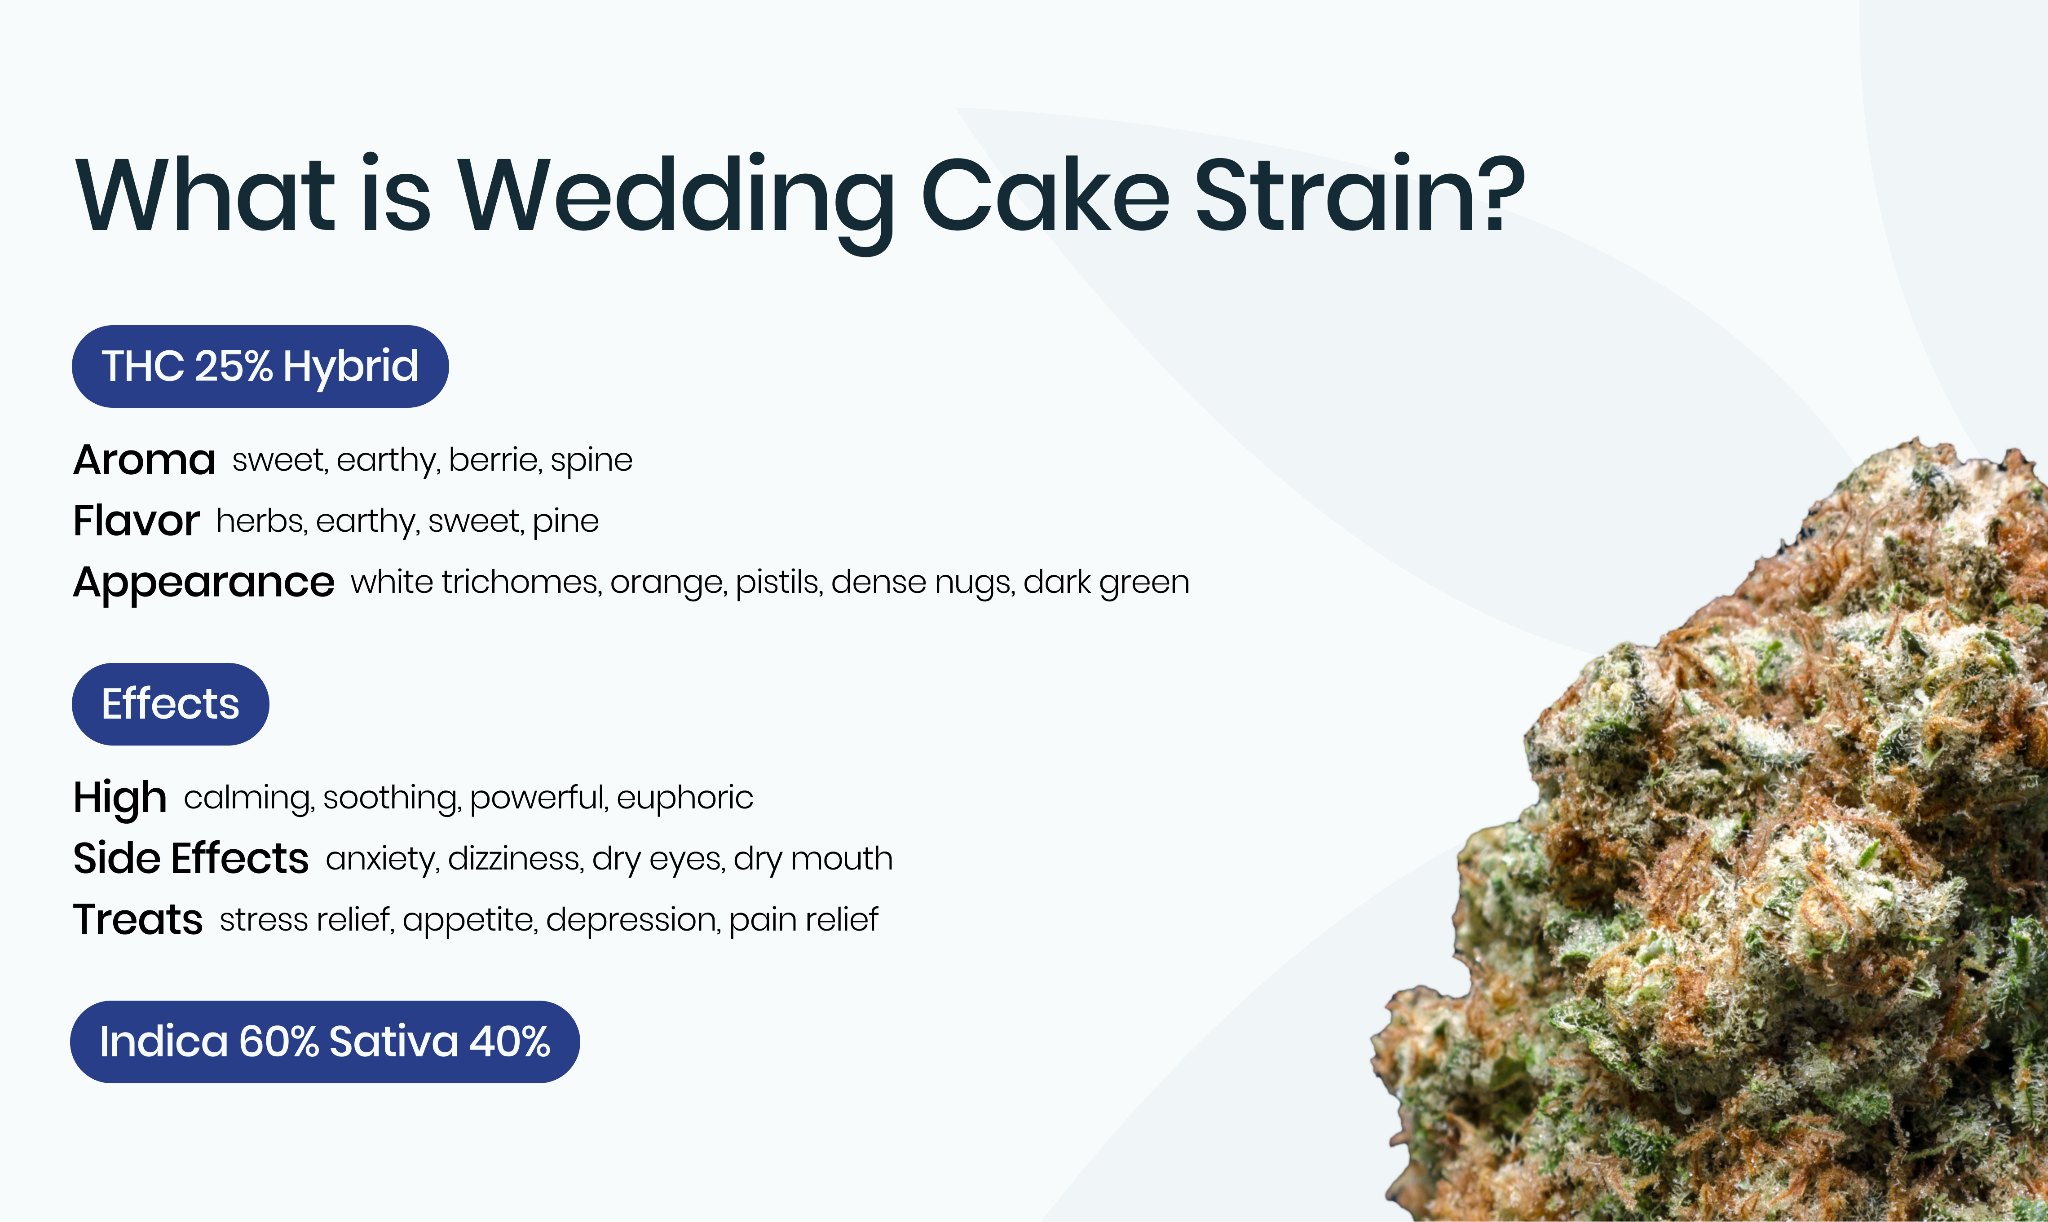 Why Is the Wedding Cake Strain So Special?